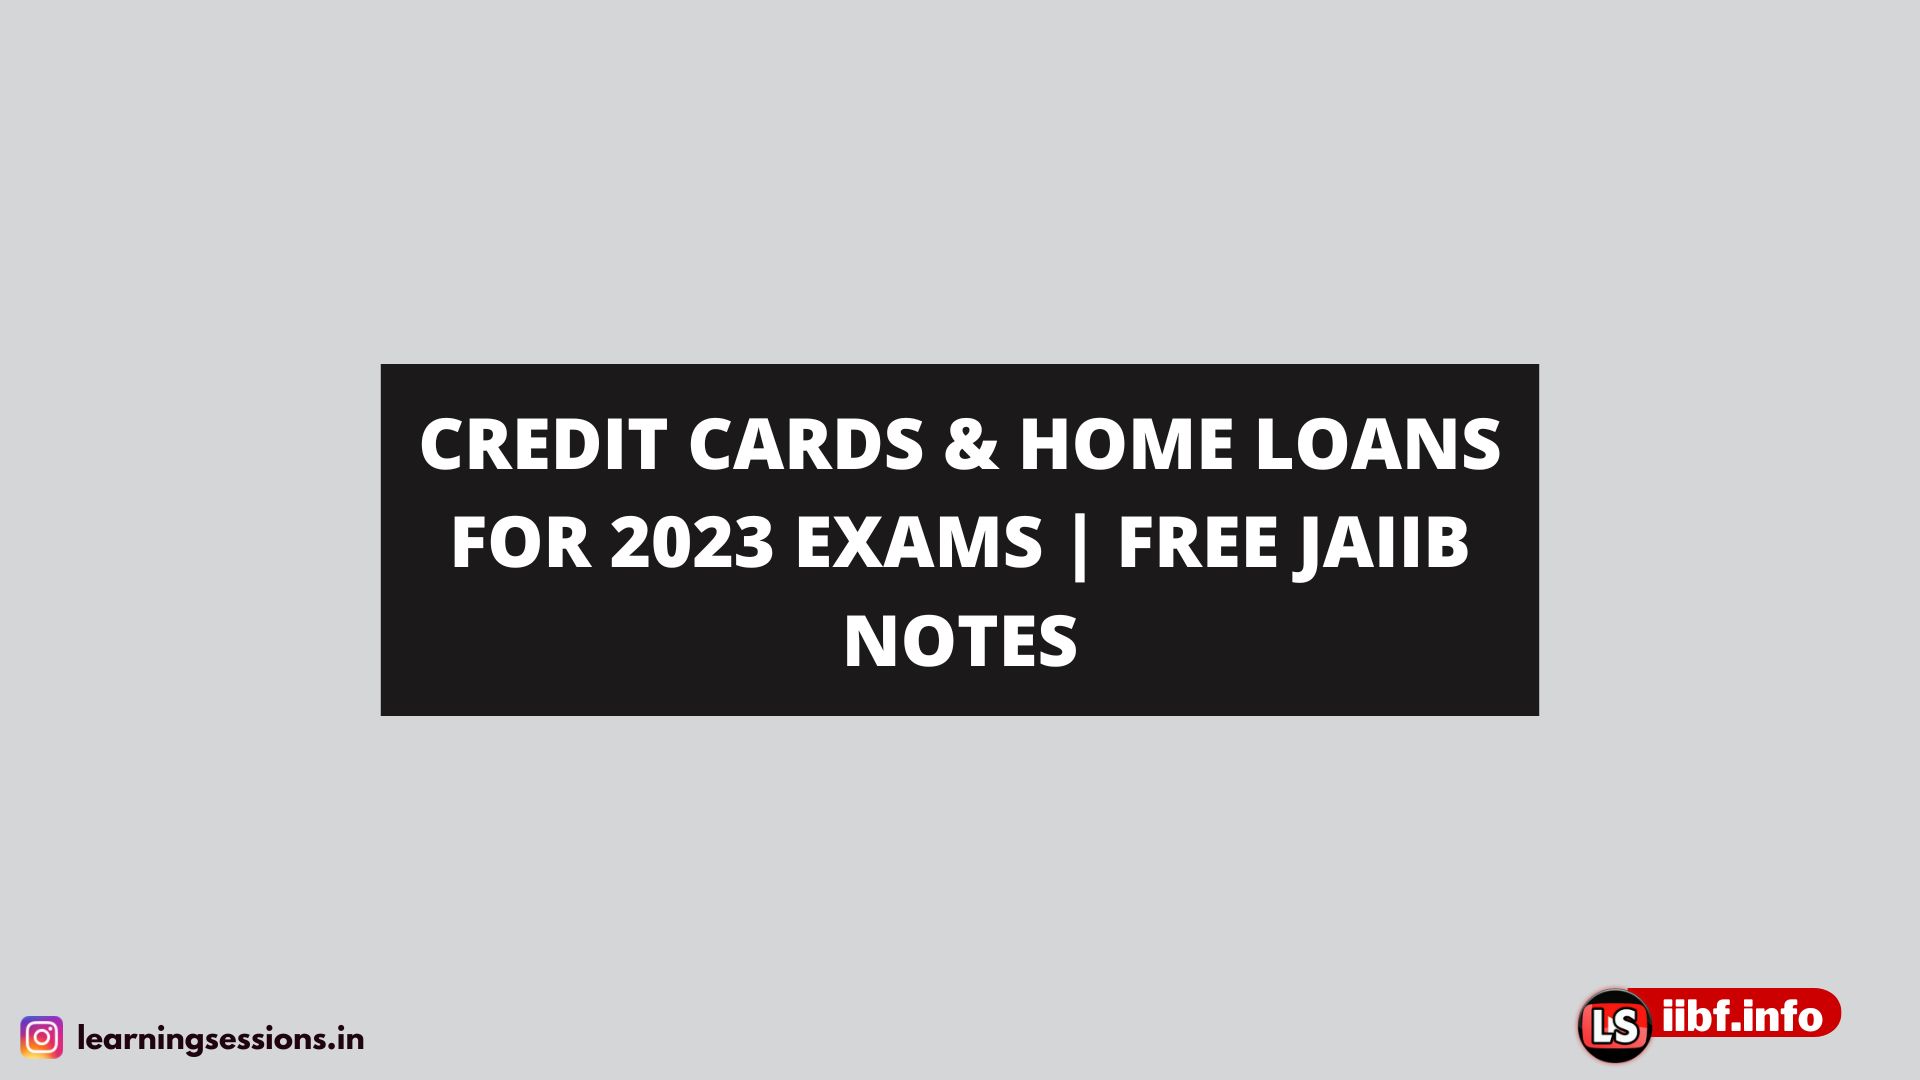 CREDIT CARDS & HOME LOANS FOR 2023 EXAMS | FREE JAIIB NOTES